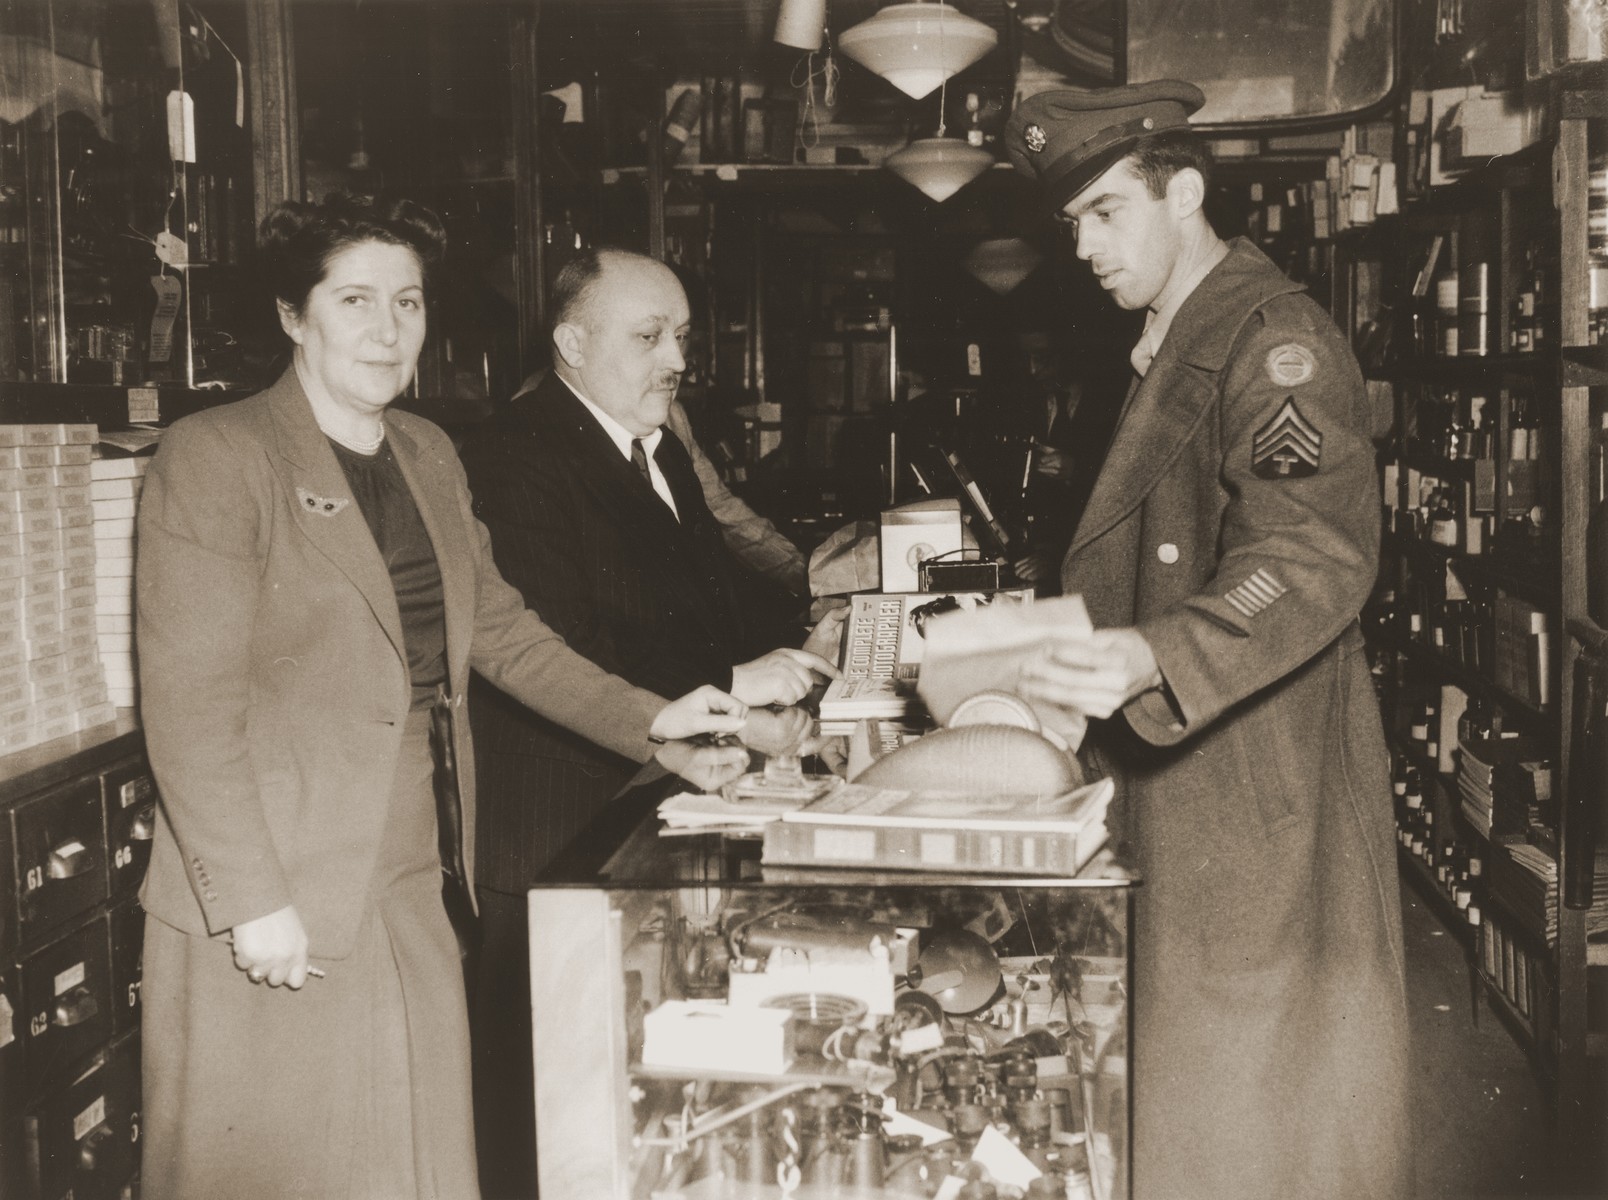 Nelly and Raffael Brenner wait on a soldier in the Brenner Photo company store located on Pennsylvania Avenue in Washington, D.C.